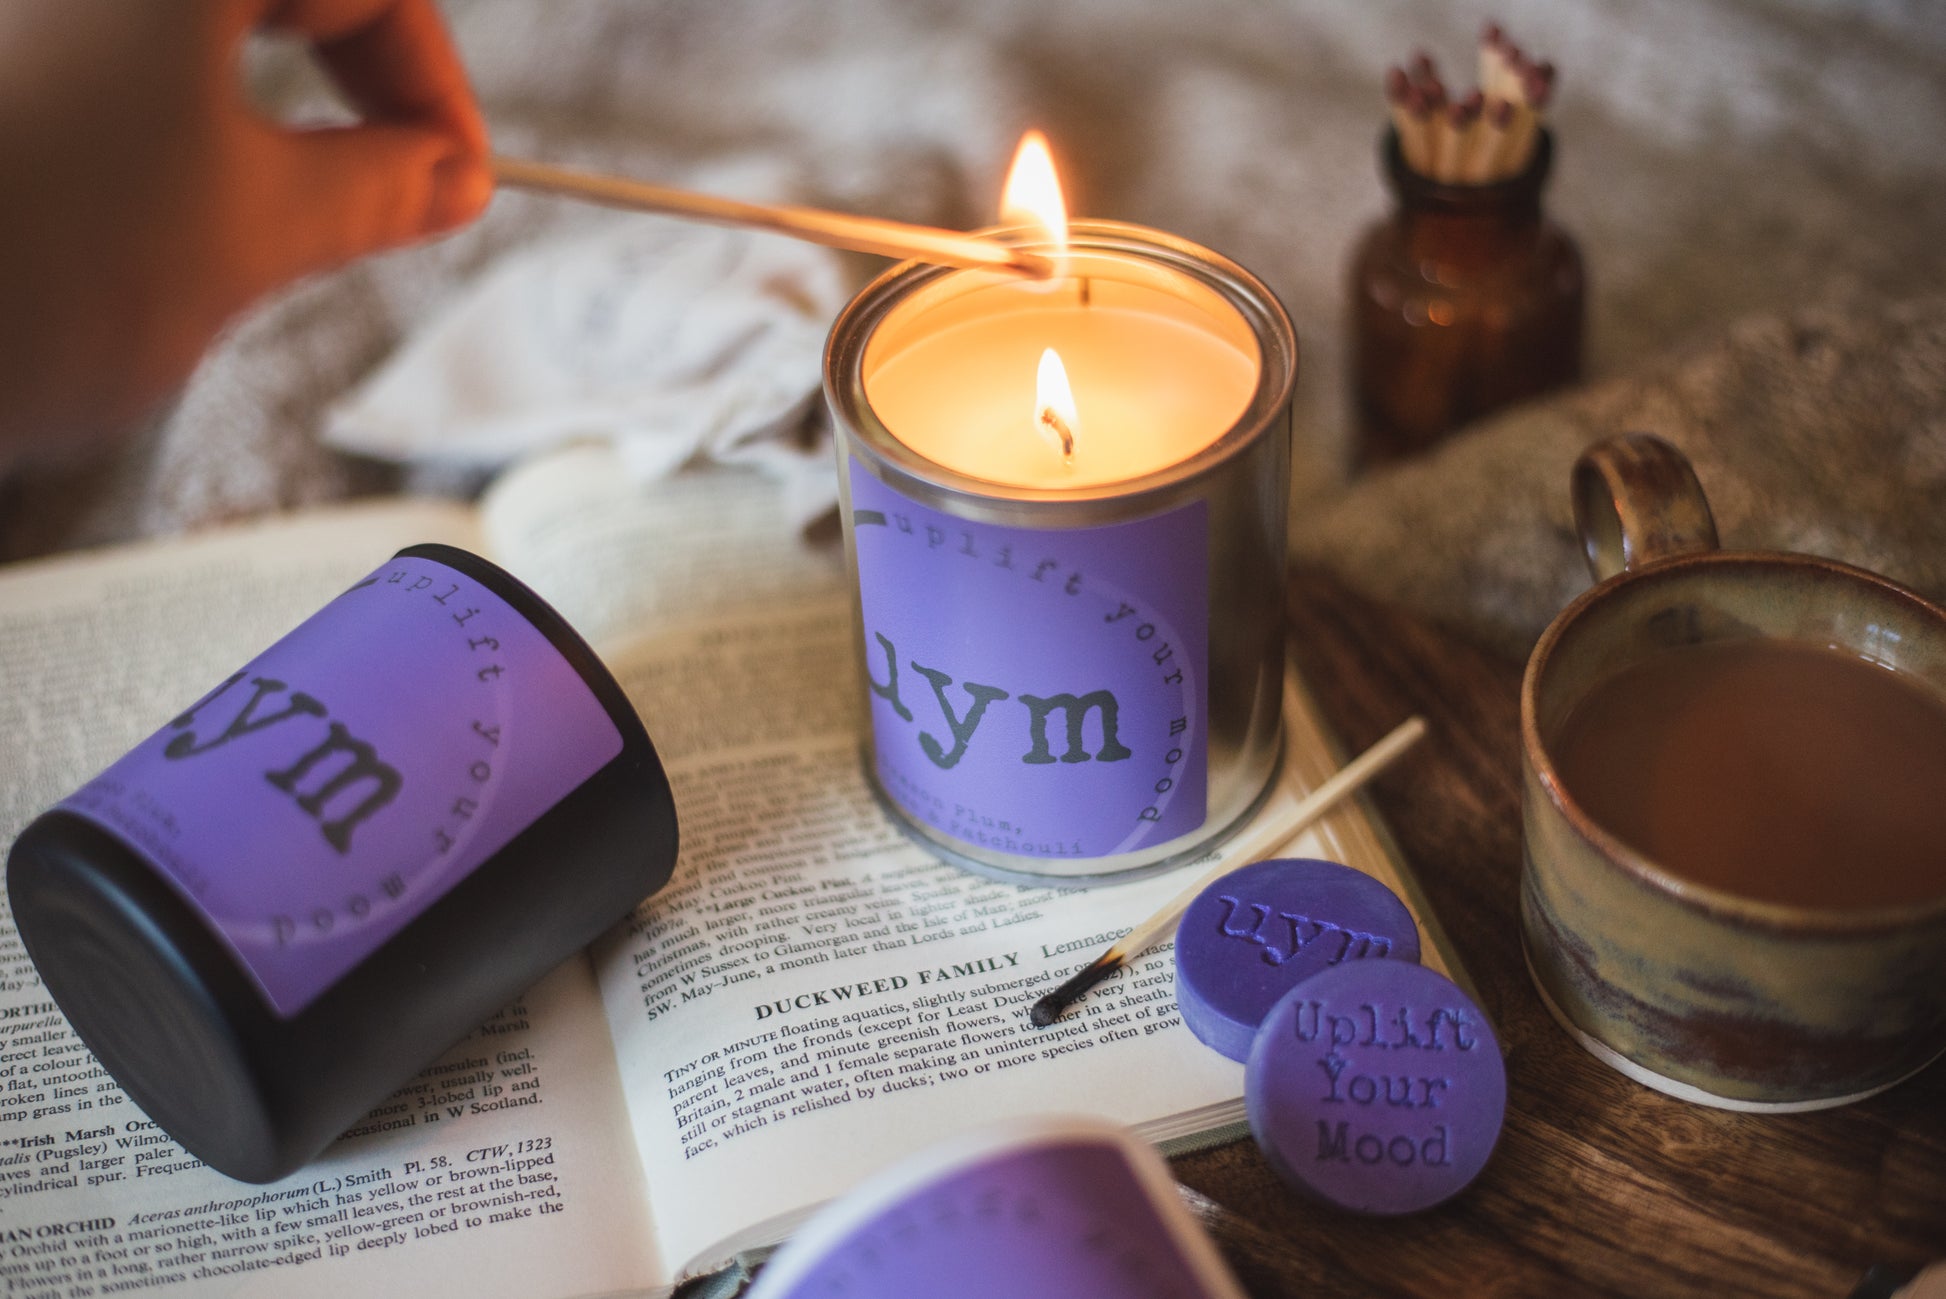 Damson Plum, Rose & Patchouli Candles, highly sceted natural wax, organic cotton wick, metallic tin lighted candle, cosy background. Uplift Your Mood Scents